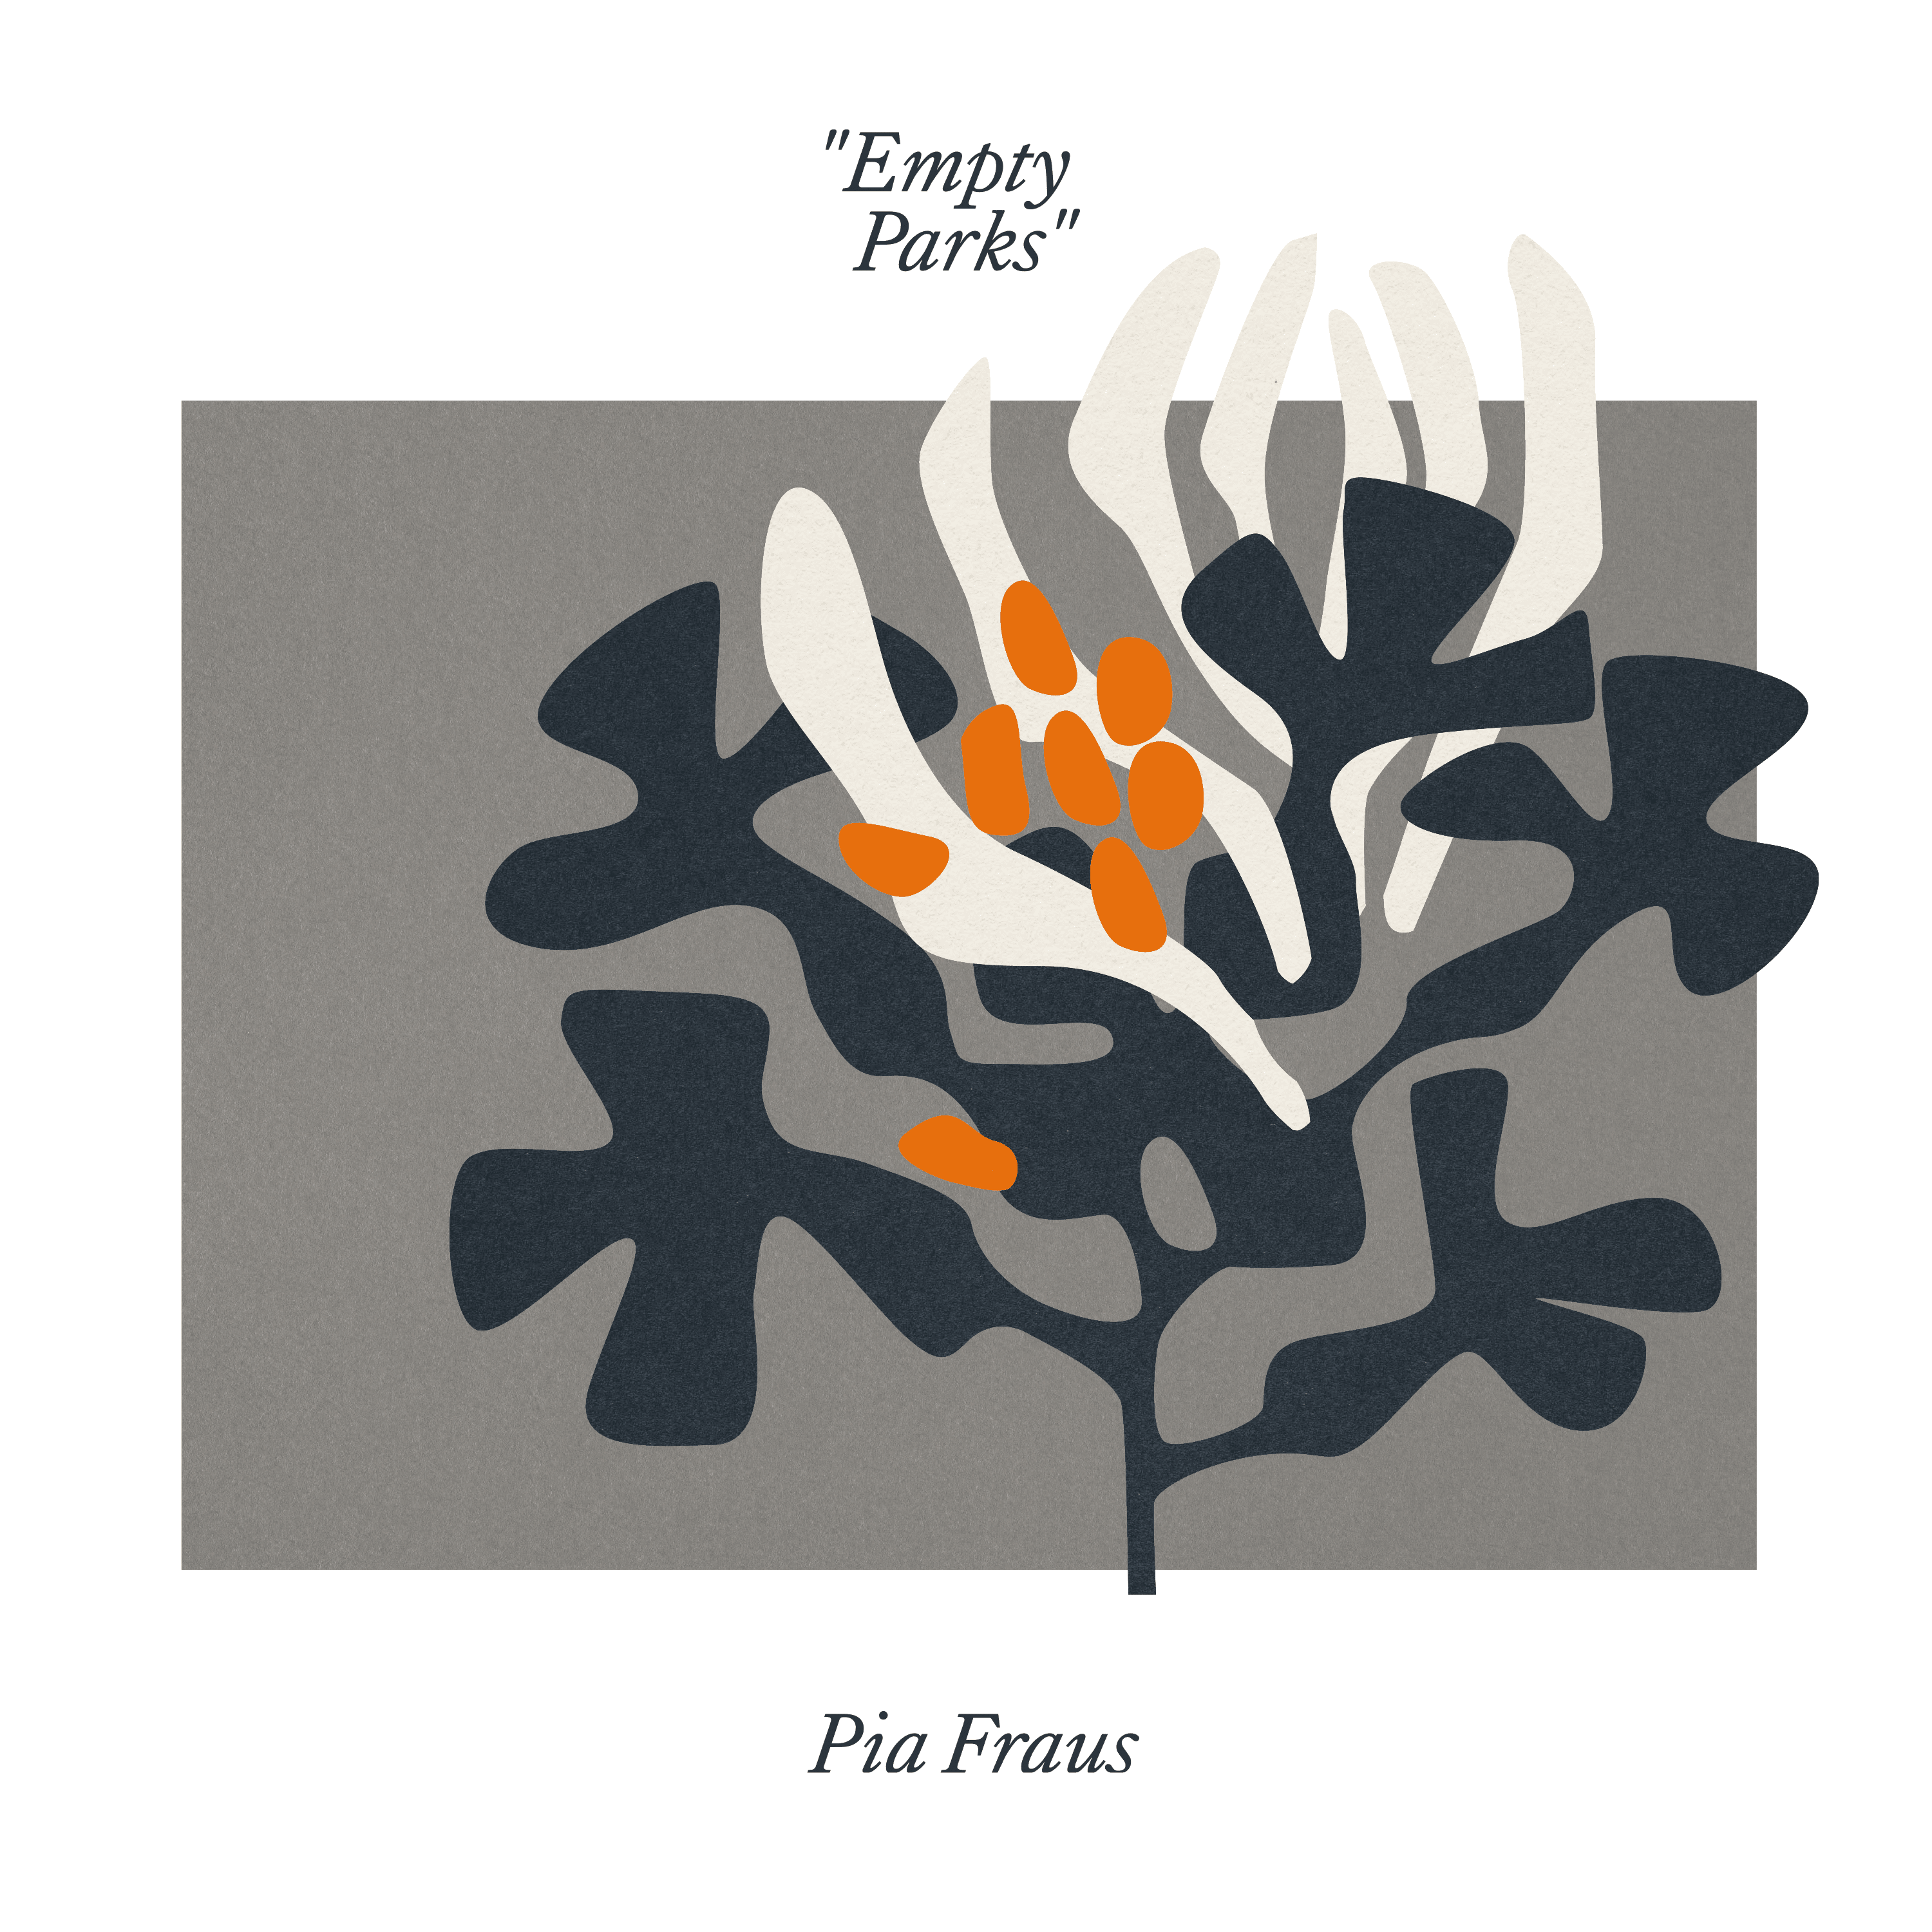 PIA FRAUS - EMPTY PARKS CD